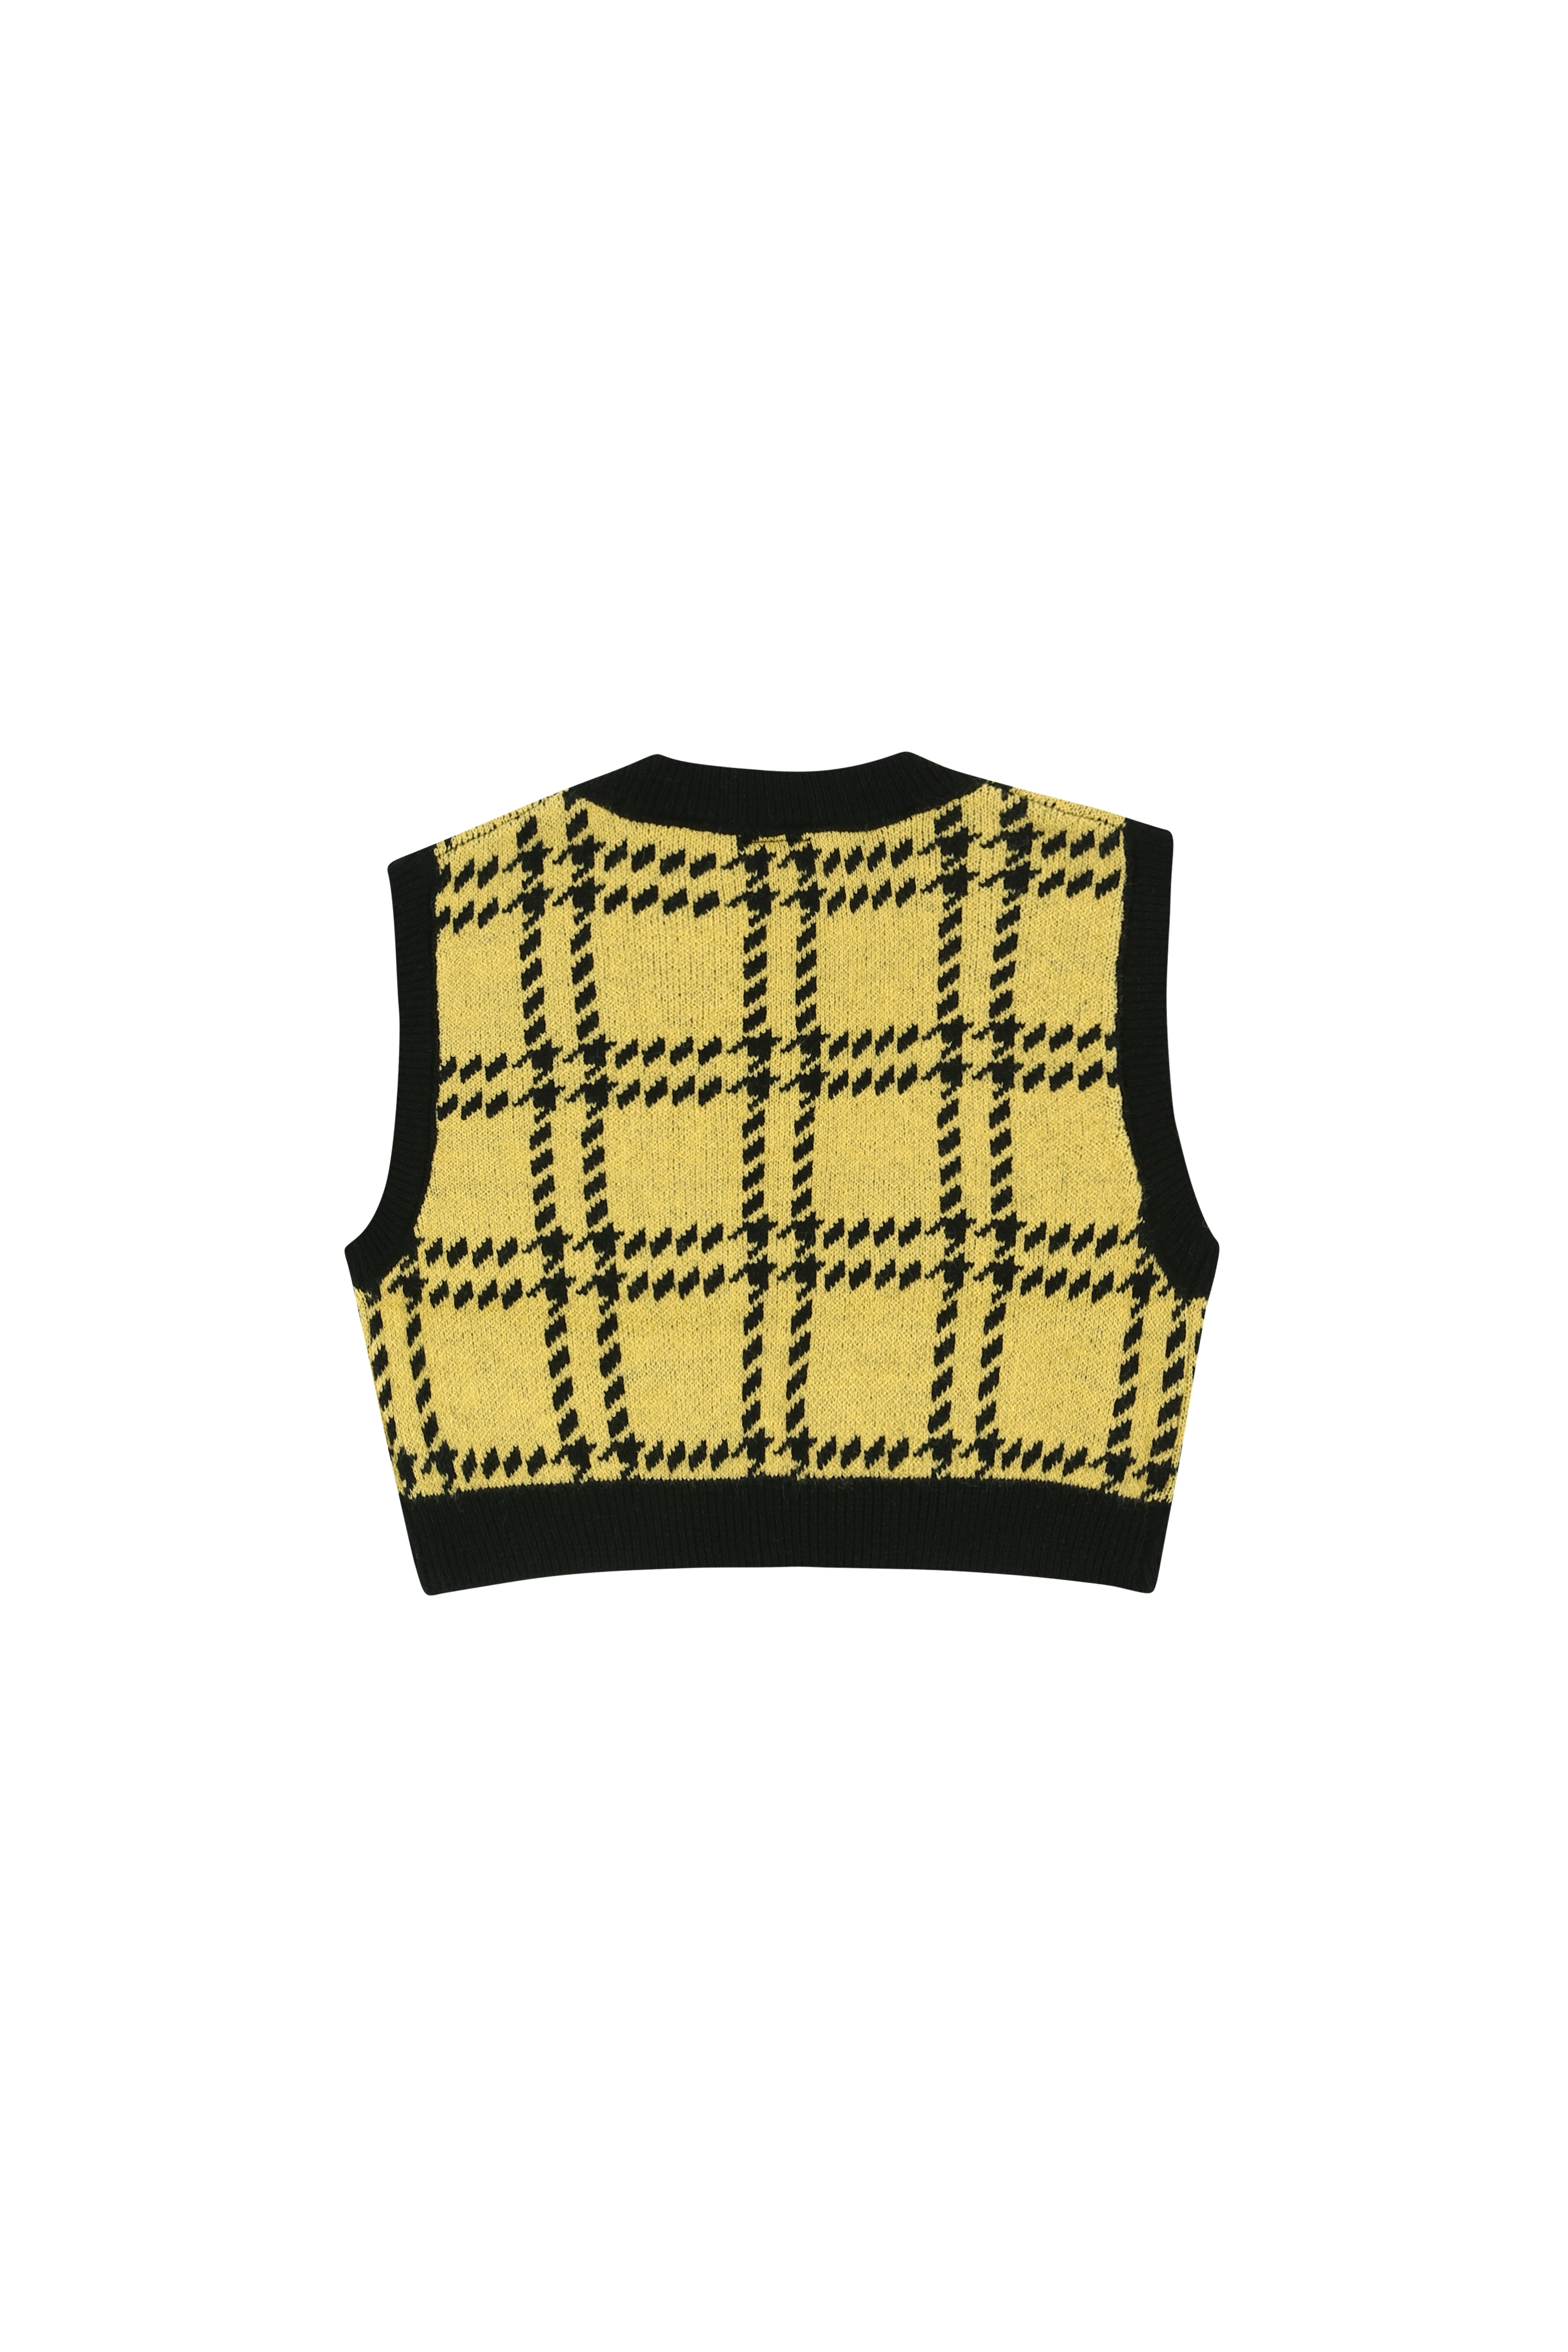 High Teen Checkered Cropped Knitwear Vest